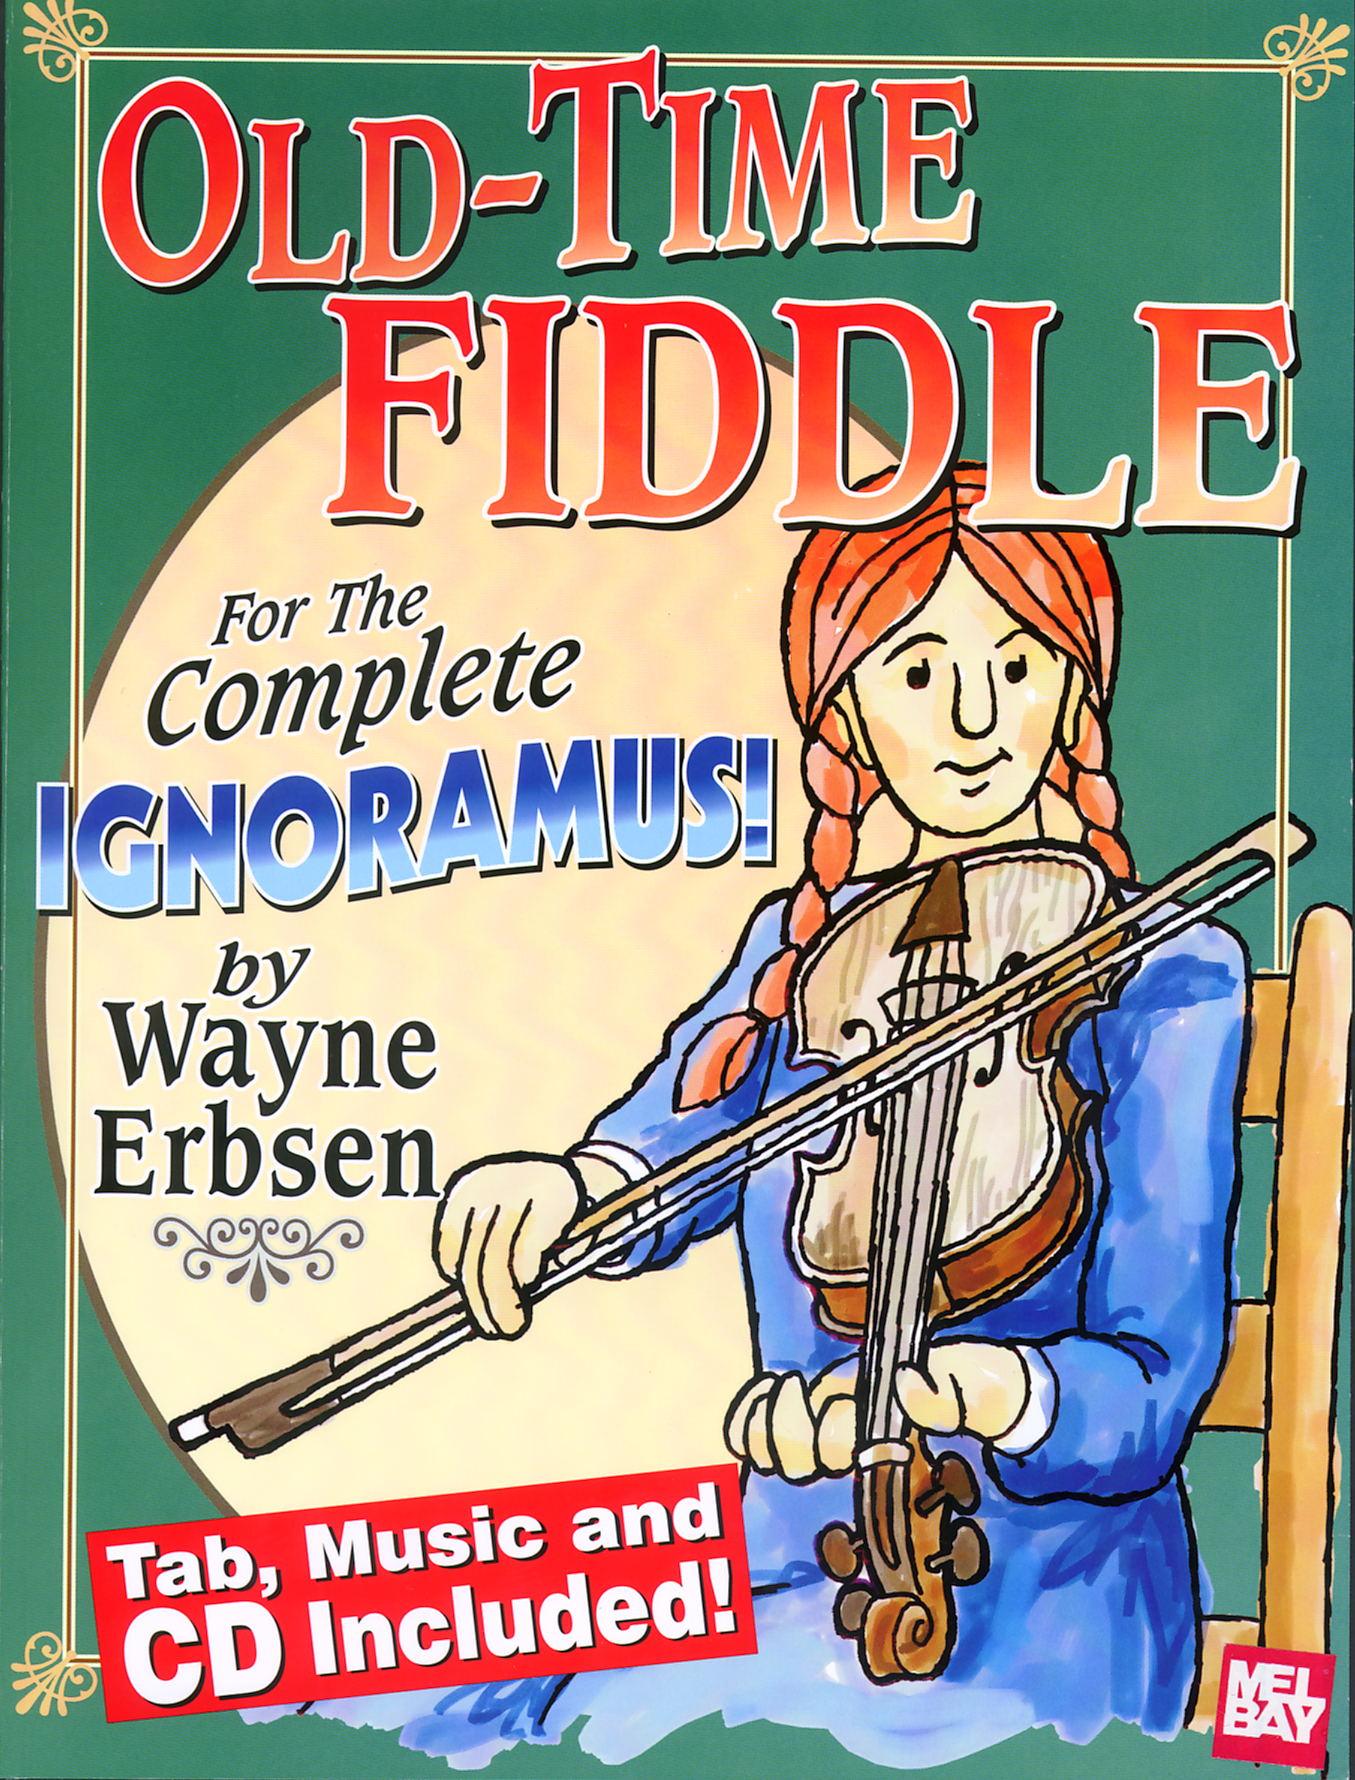 Old-Time Fiddle For the Complete Ignoramus - Tif file